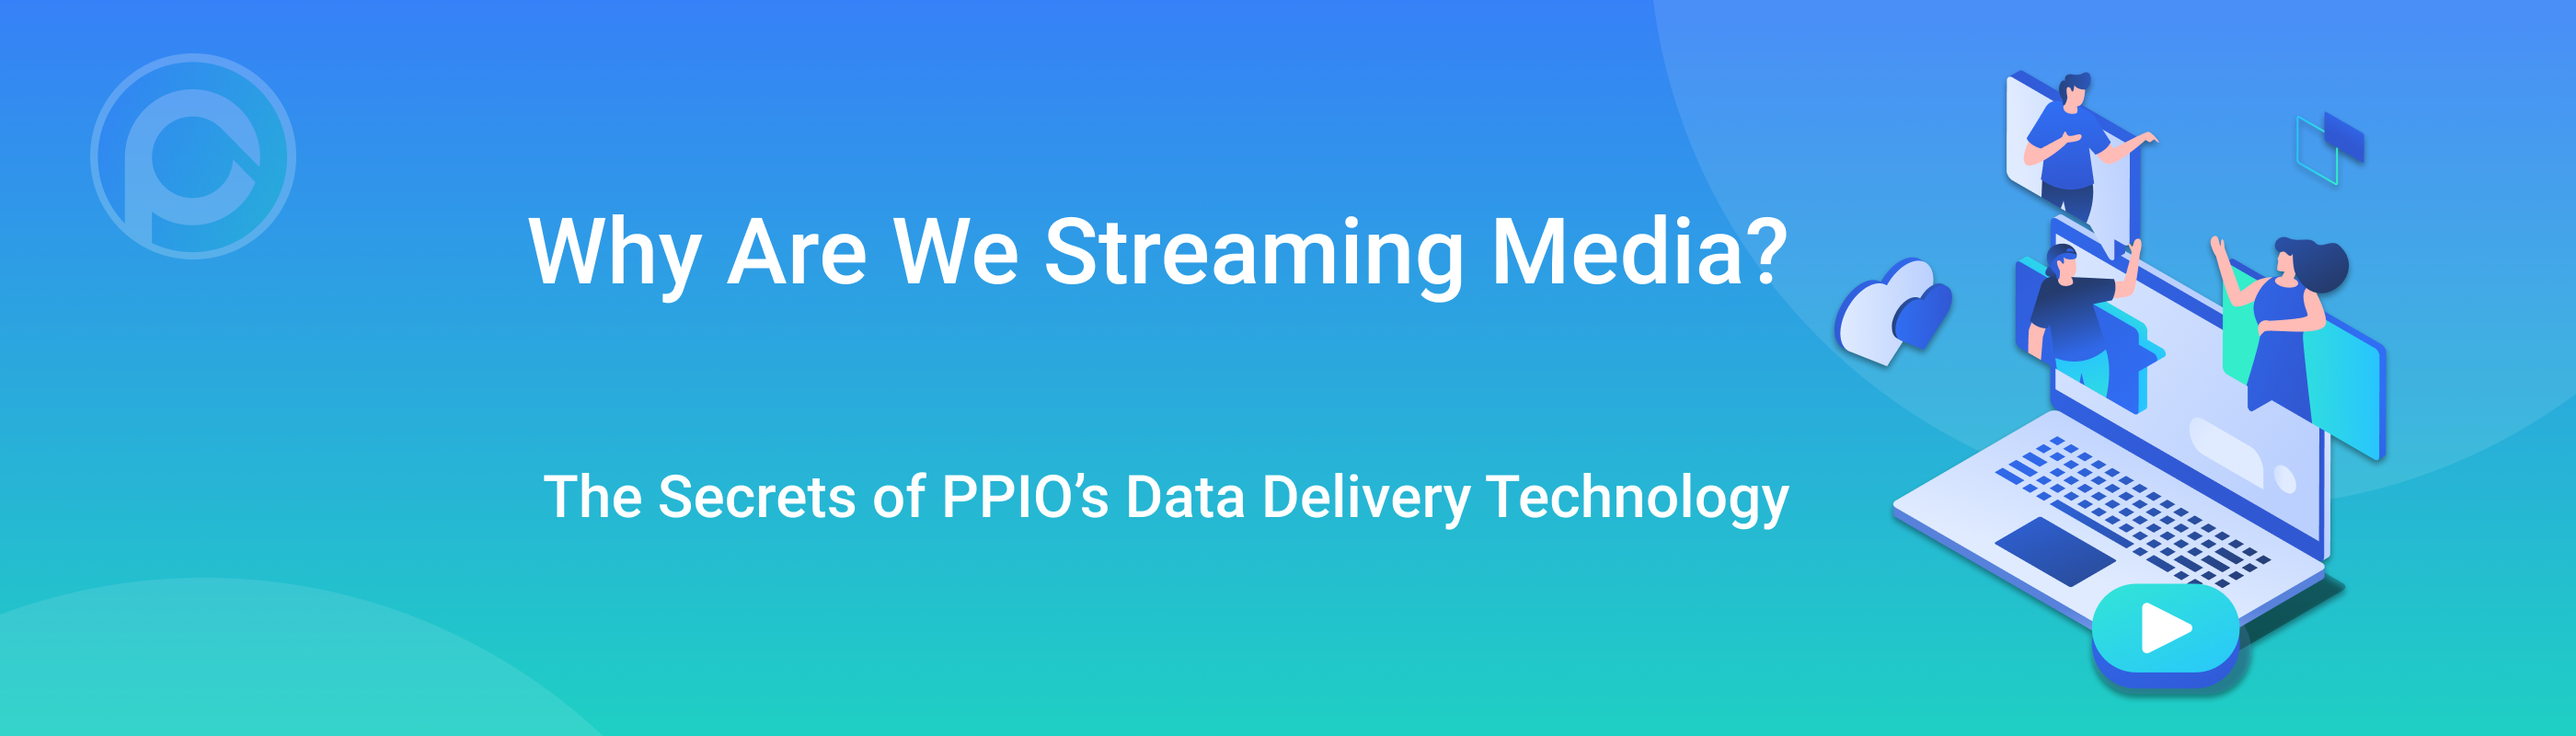 Why Are We Streaming Media? The Secrets of PPIO’s Data Delivery Technology